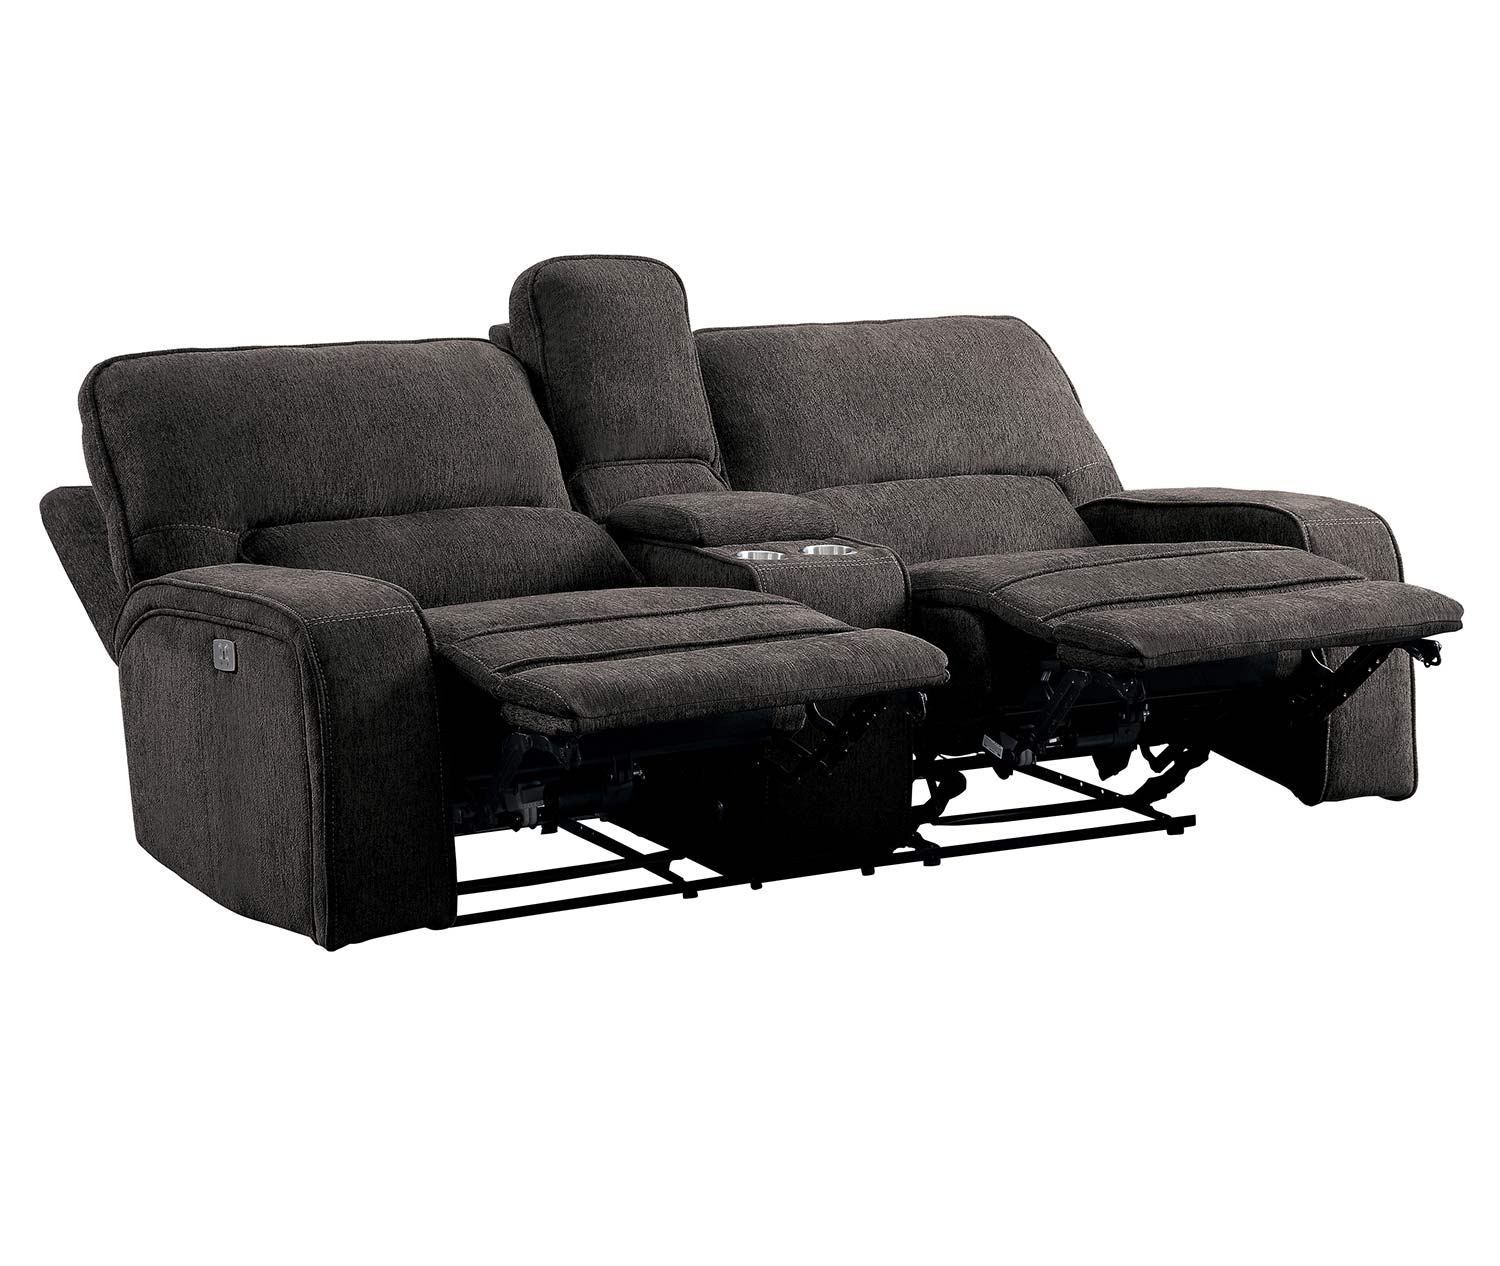 Homelegance Borneo Power Double Reclining Love Seat with Center Console and Power Headrests - Chocolate